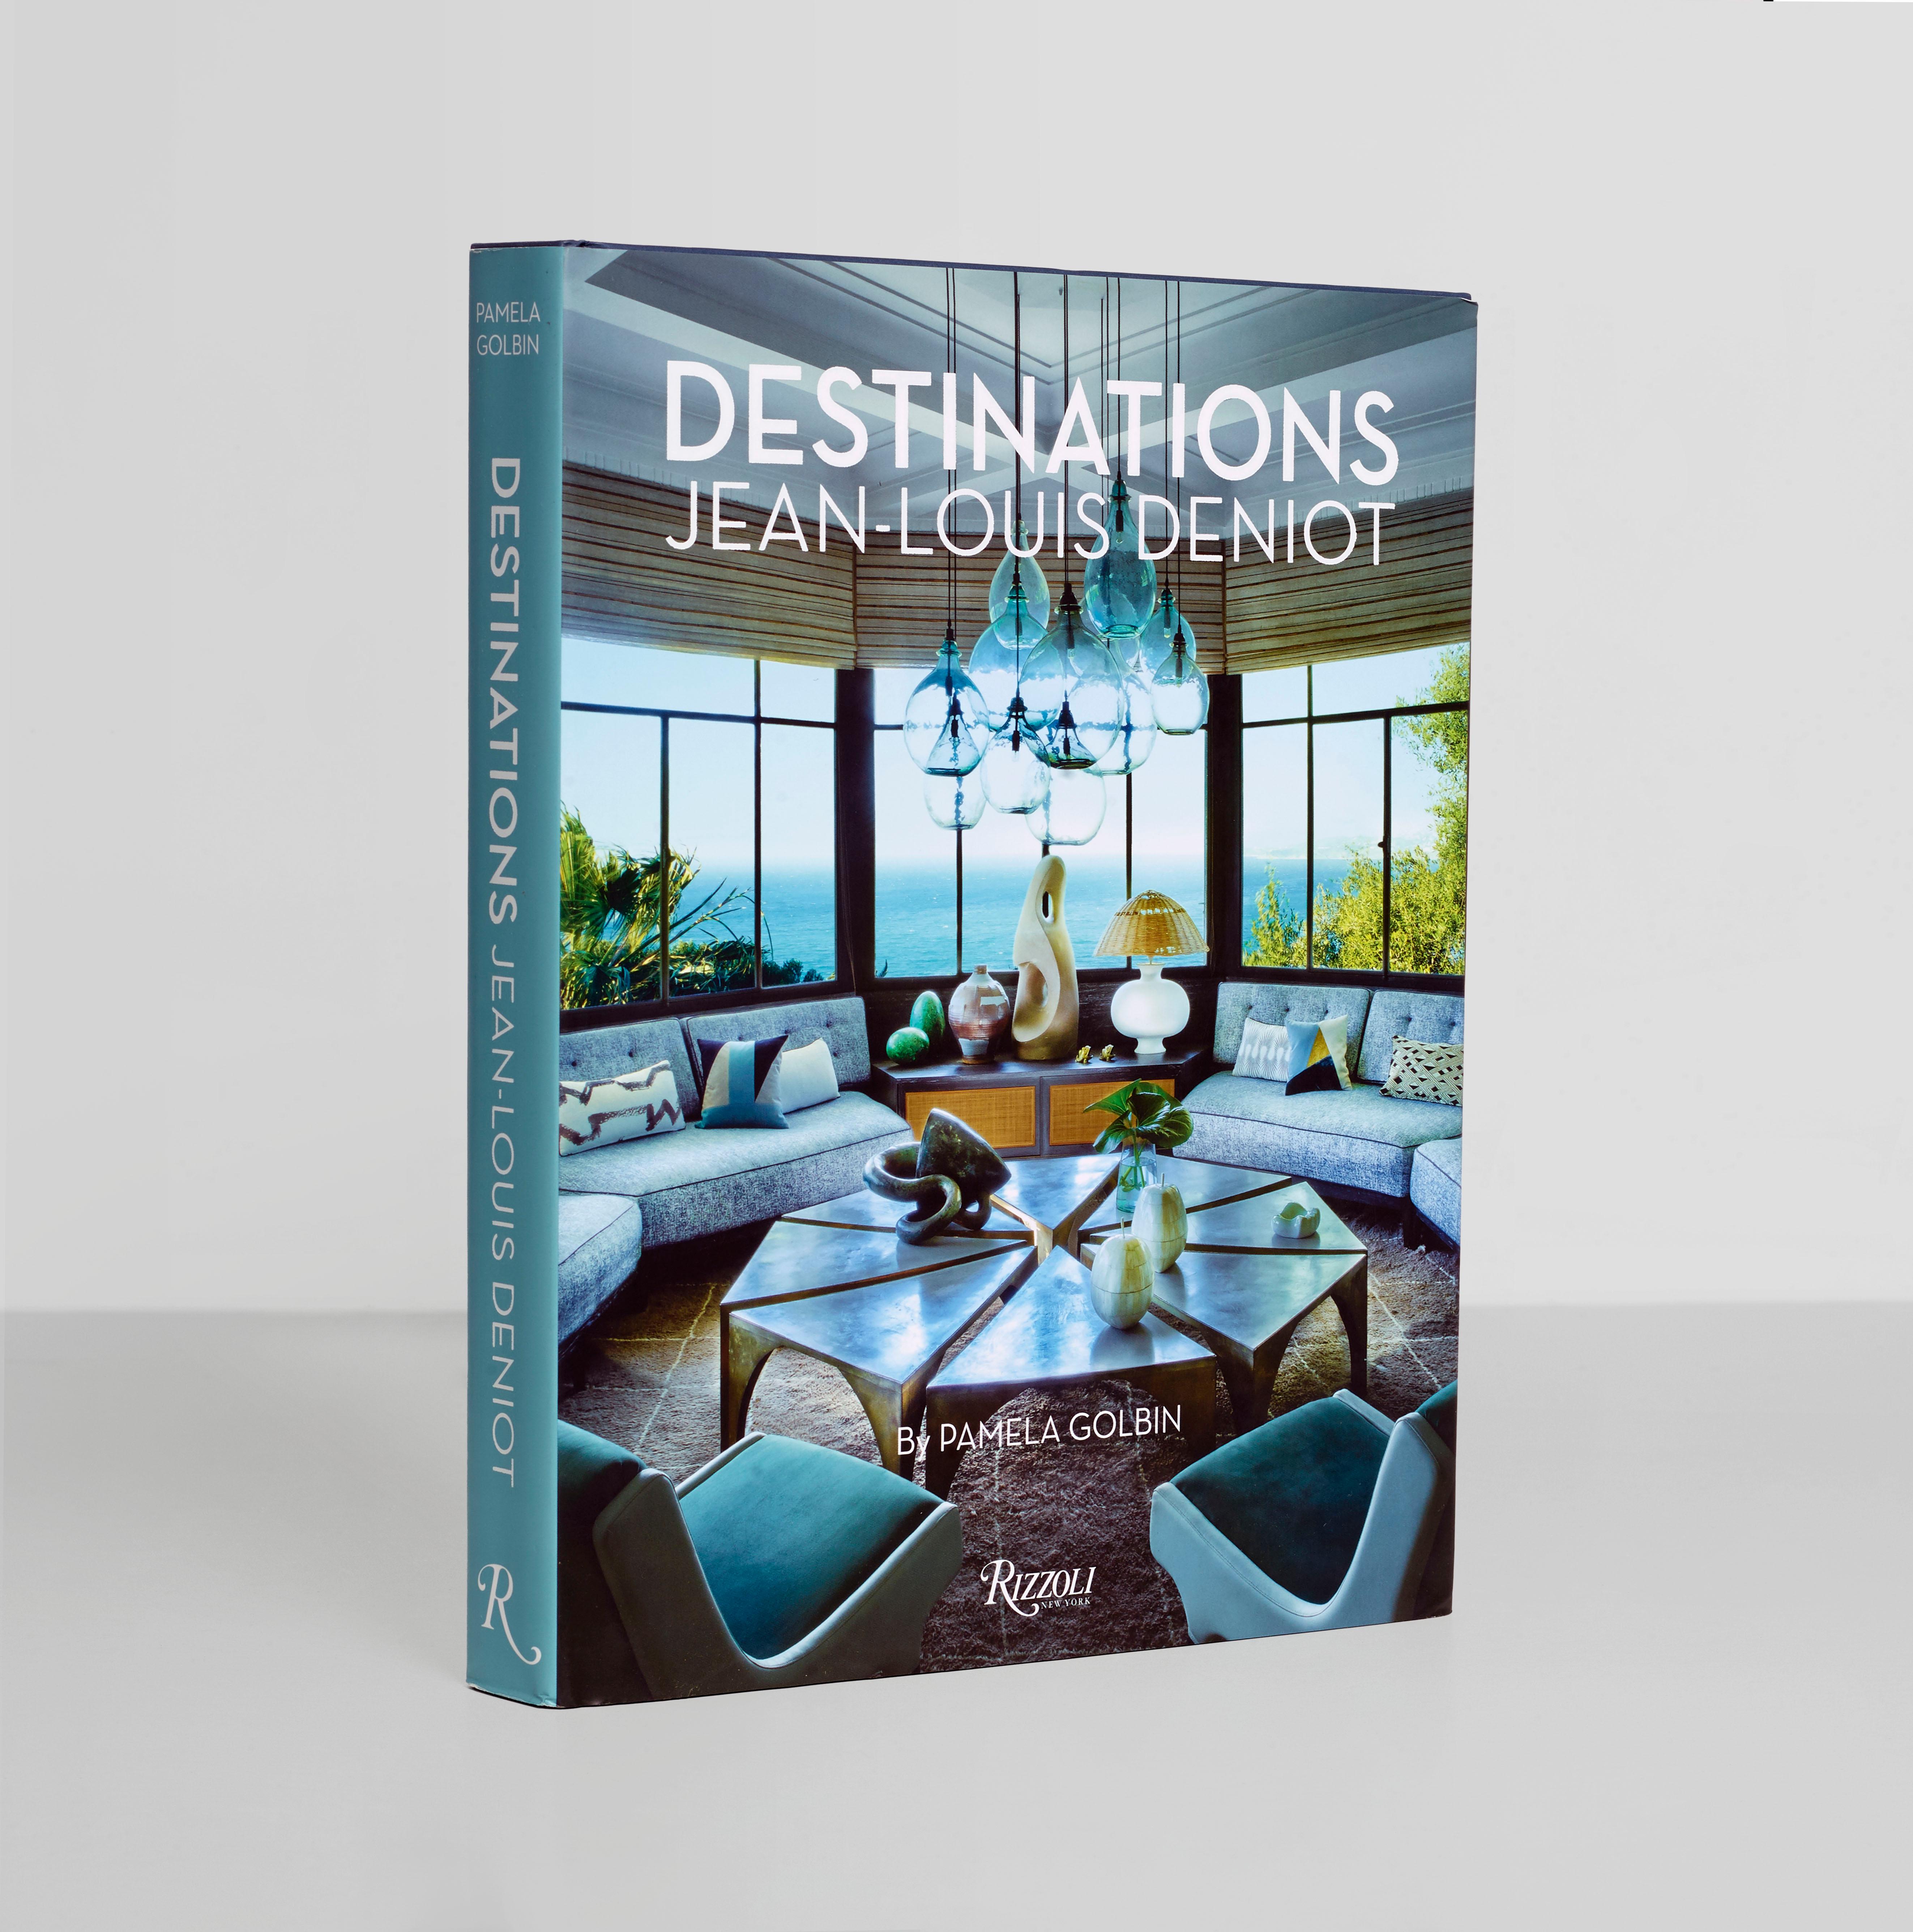 Author Pamela Golbin and Jean-Louis Deniot

A leading name in the international design scene, and a regular in every major shelter magazine in America, his native France and world-wide, Jean-Louis Deniot is celebrated for his exceptionally